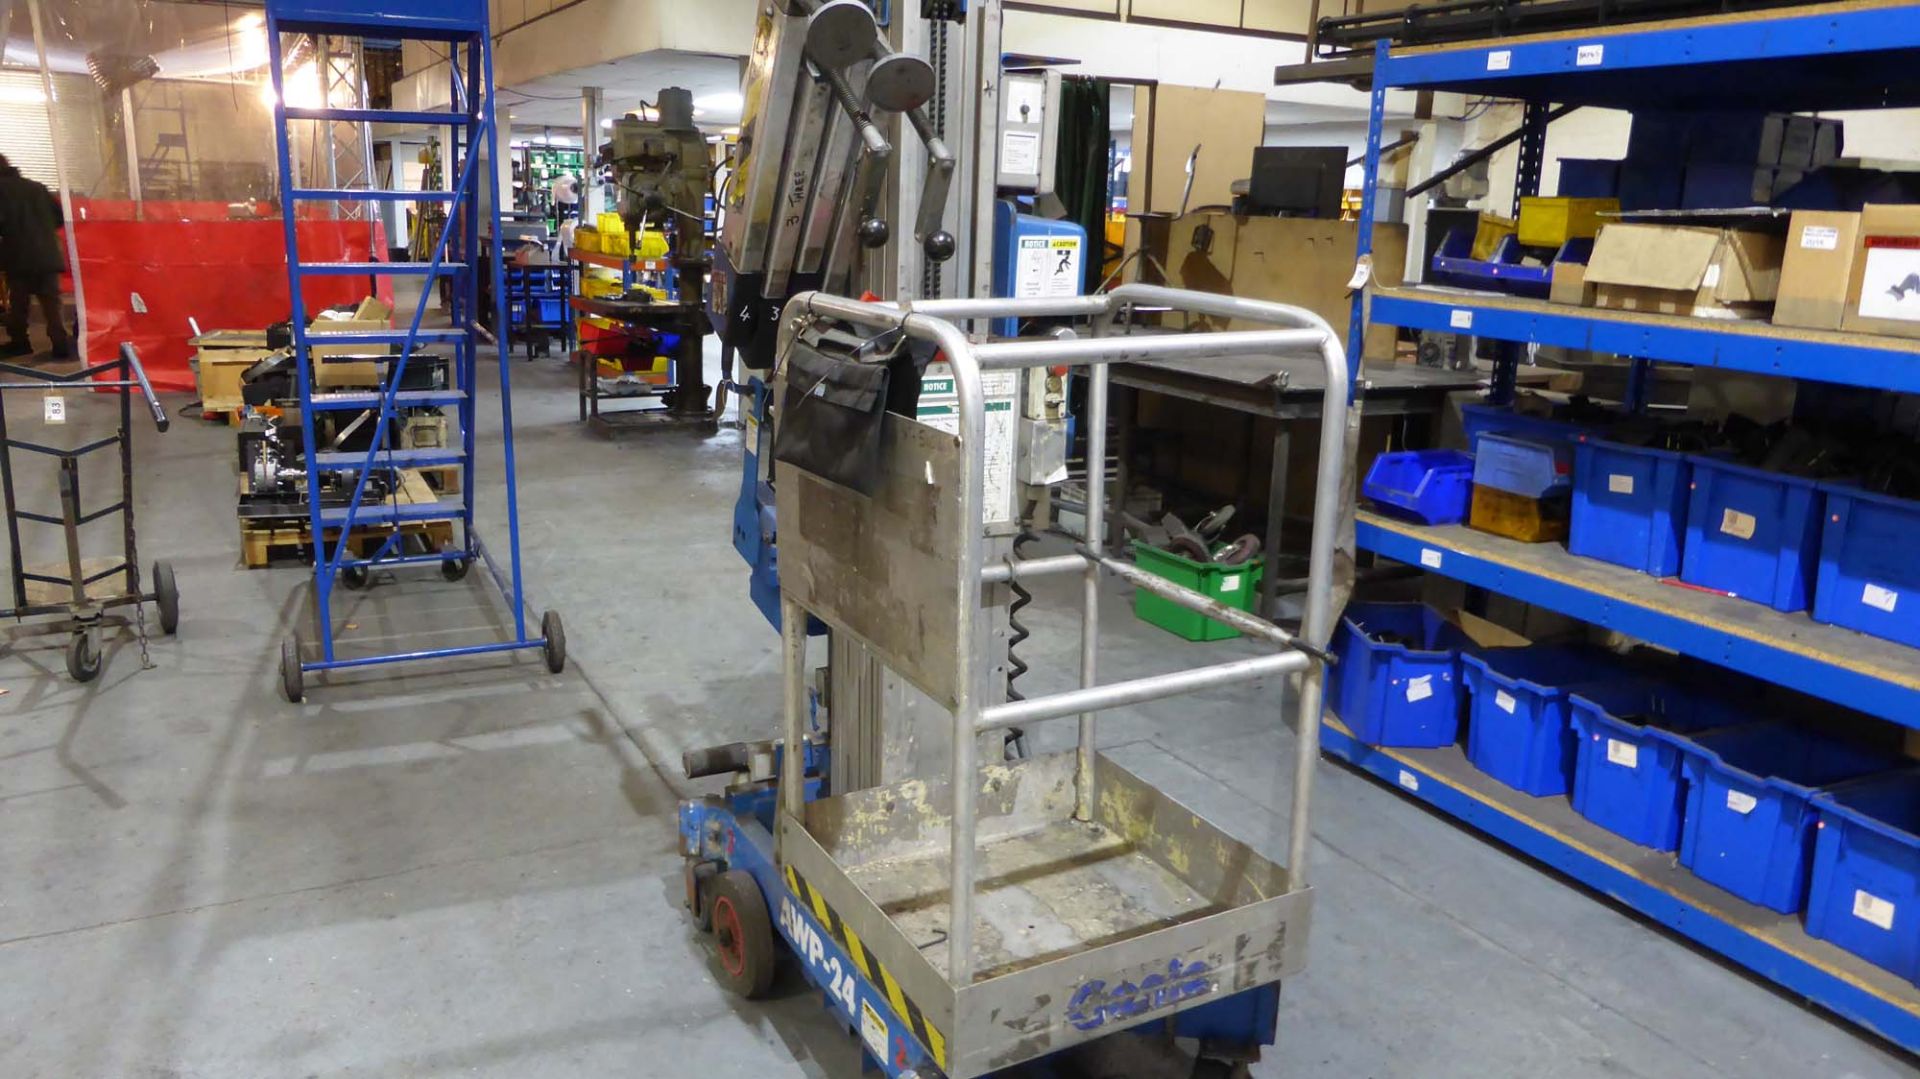 Genie 300lb platform lift height approx. 24ft with pedestrian cradle, stabilisers, 12v battery - Image 3 of 4